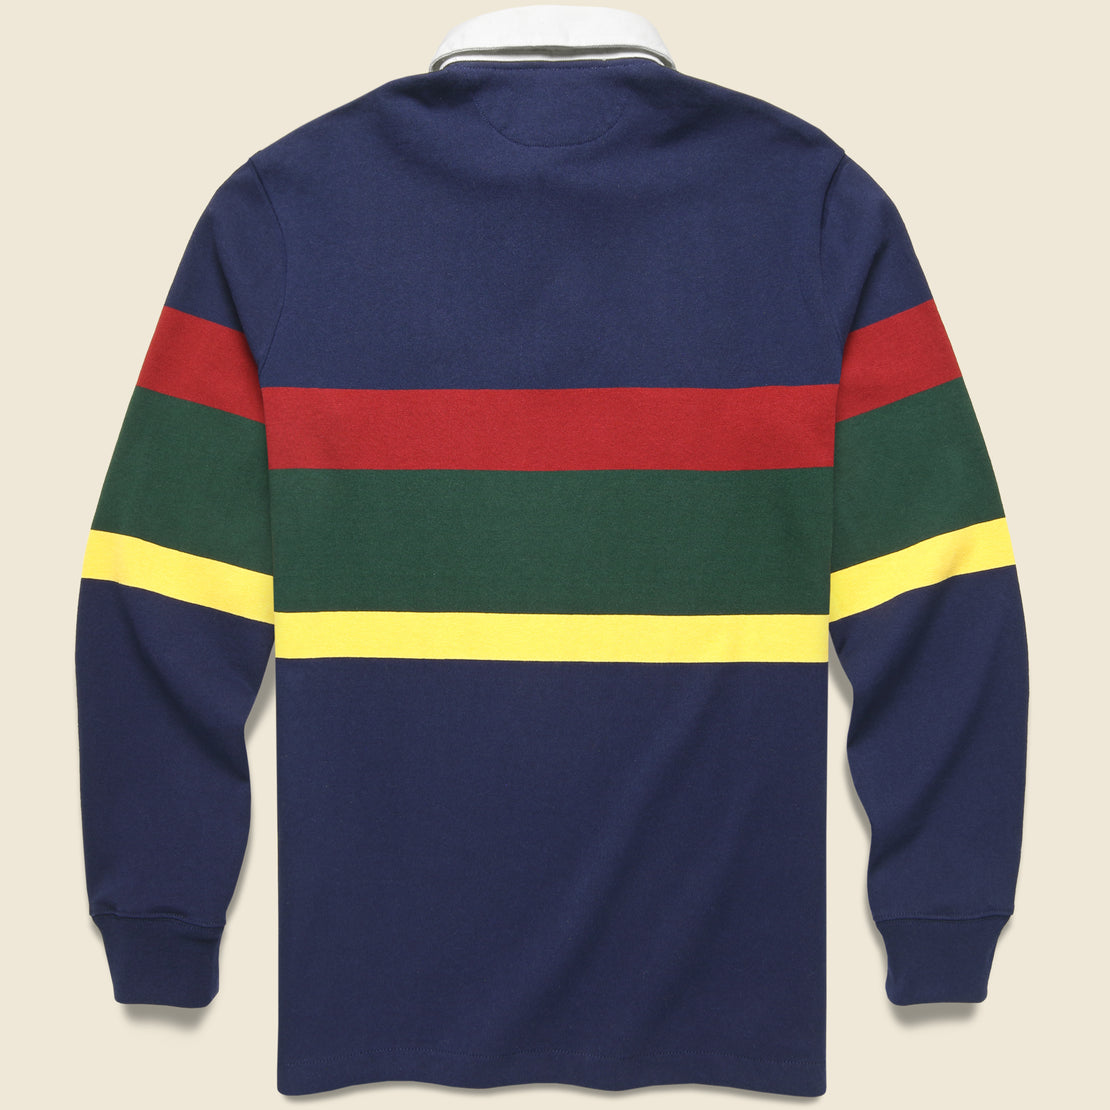 Crest Logo Rugby Polo - Cruise Navy Multi Stripe - Polo Ralph Lauren - STAG Provisions - Tops - L/S Knit